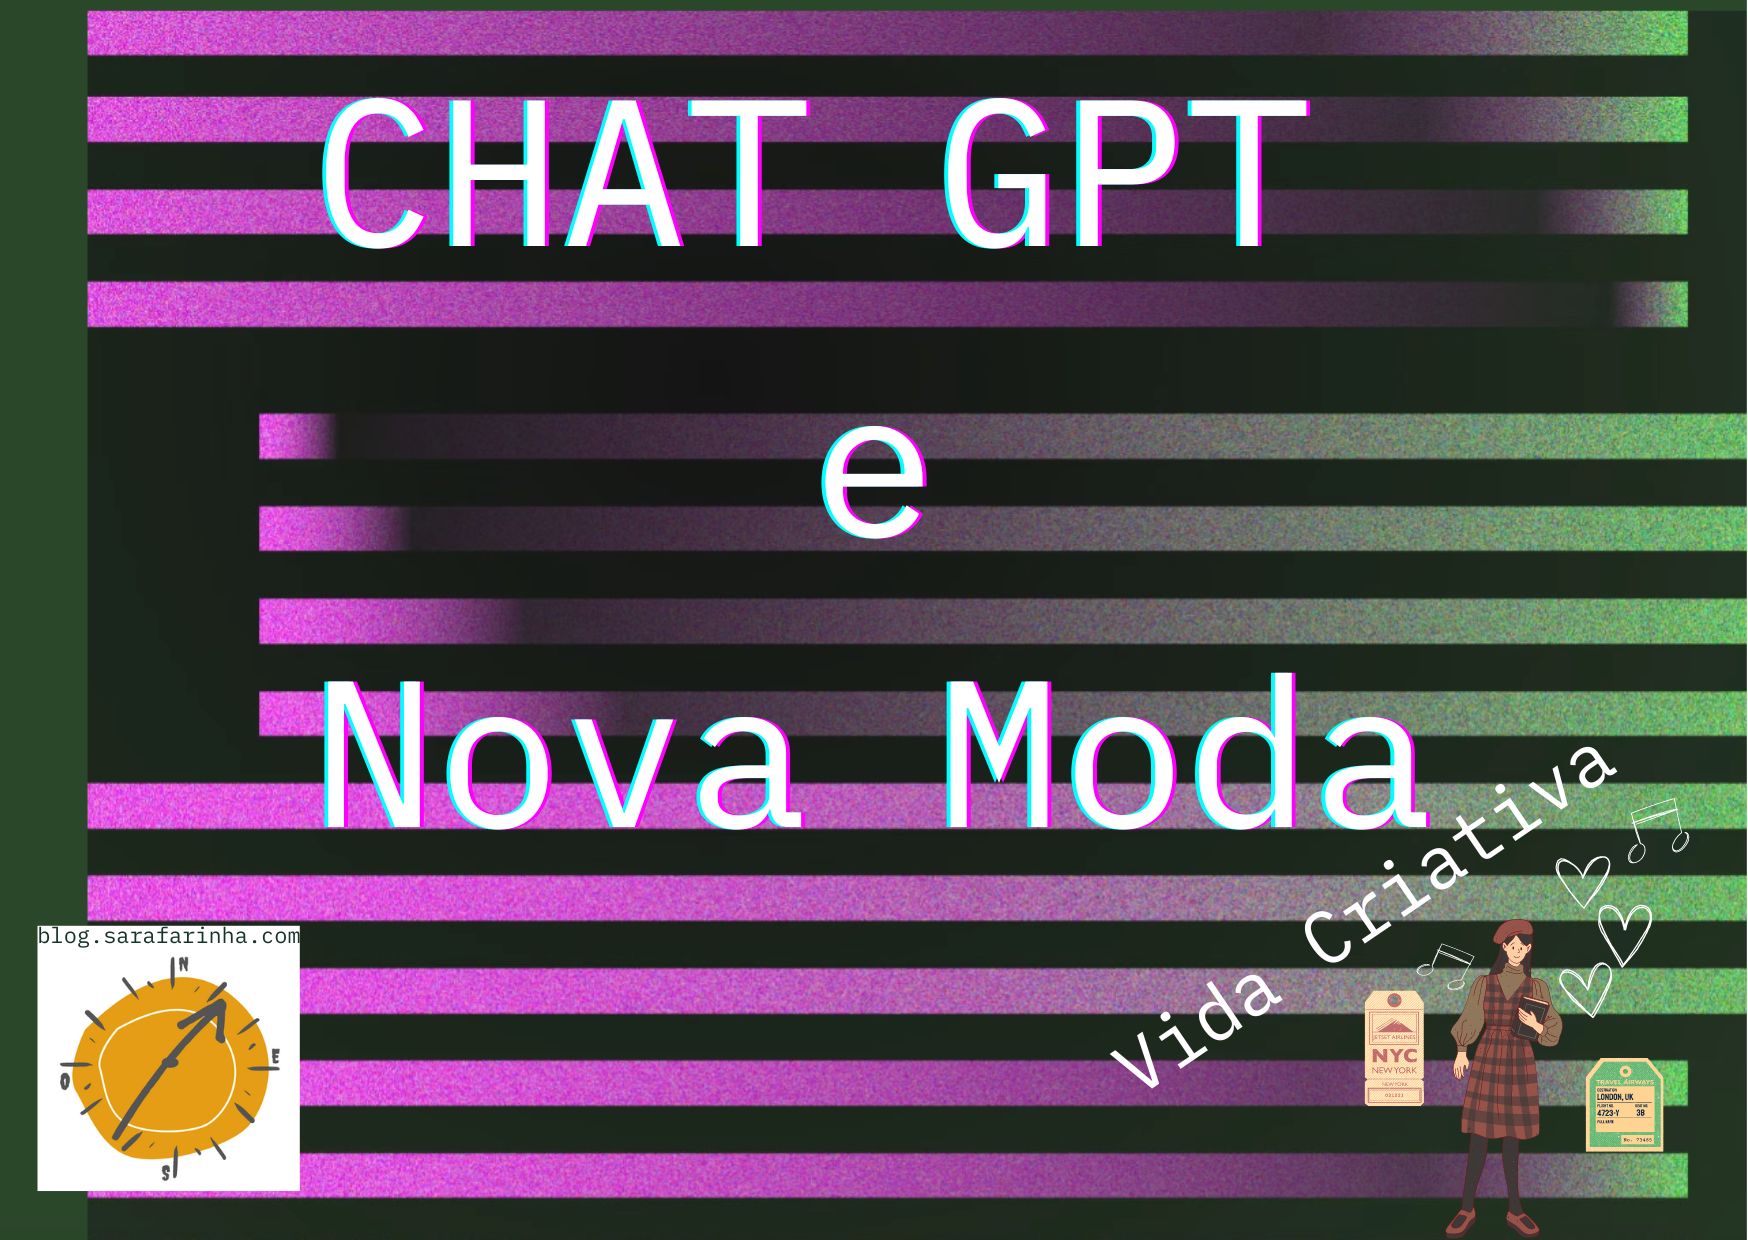 chat GPT